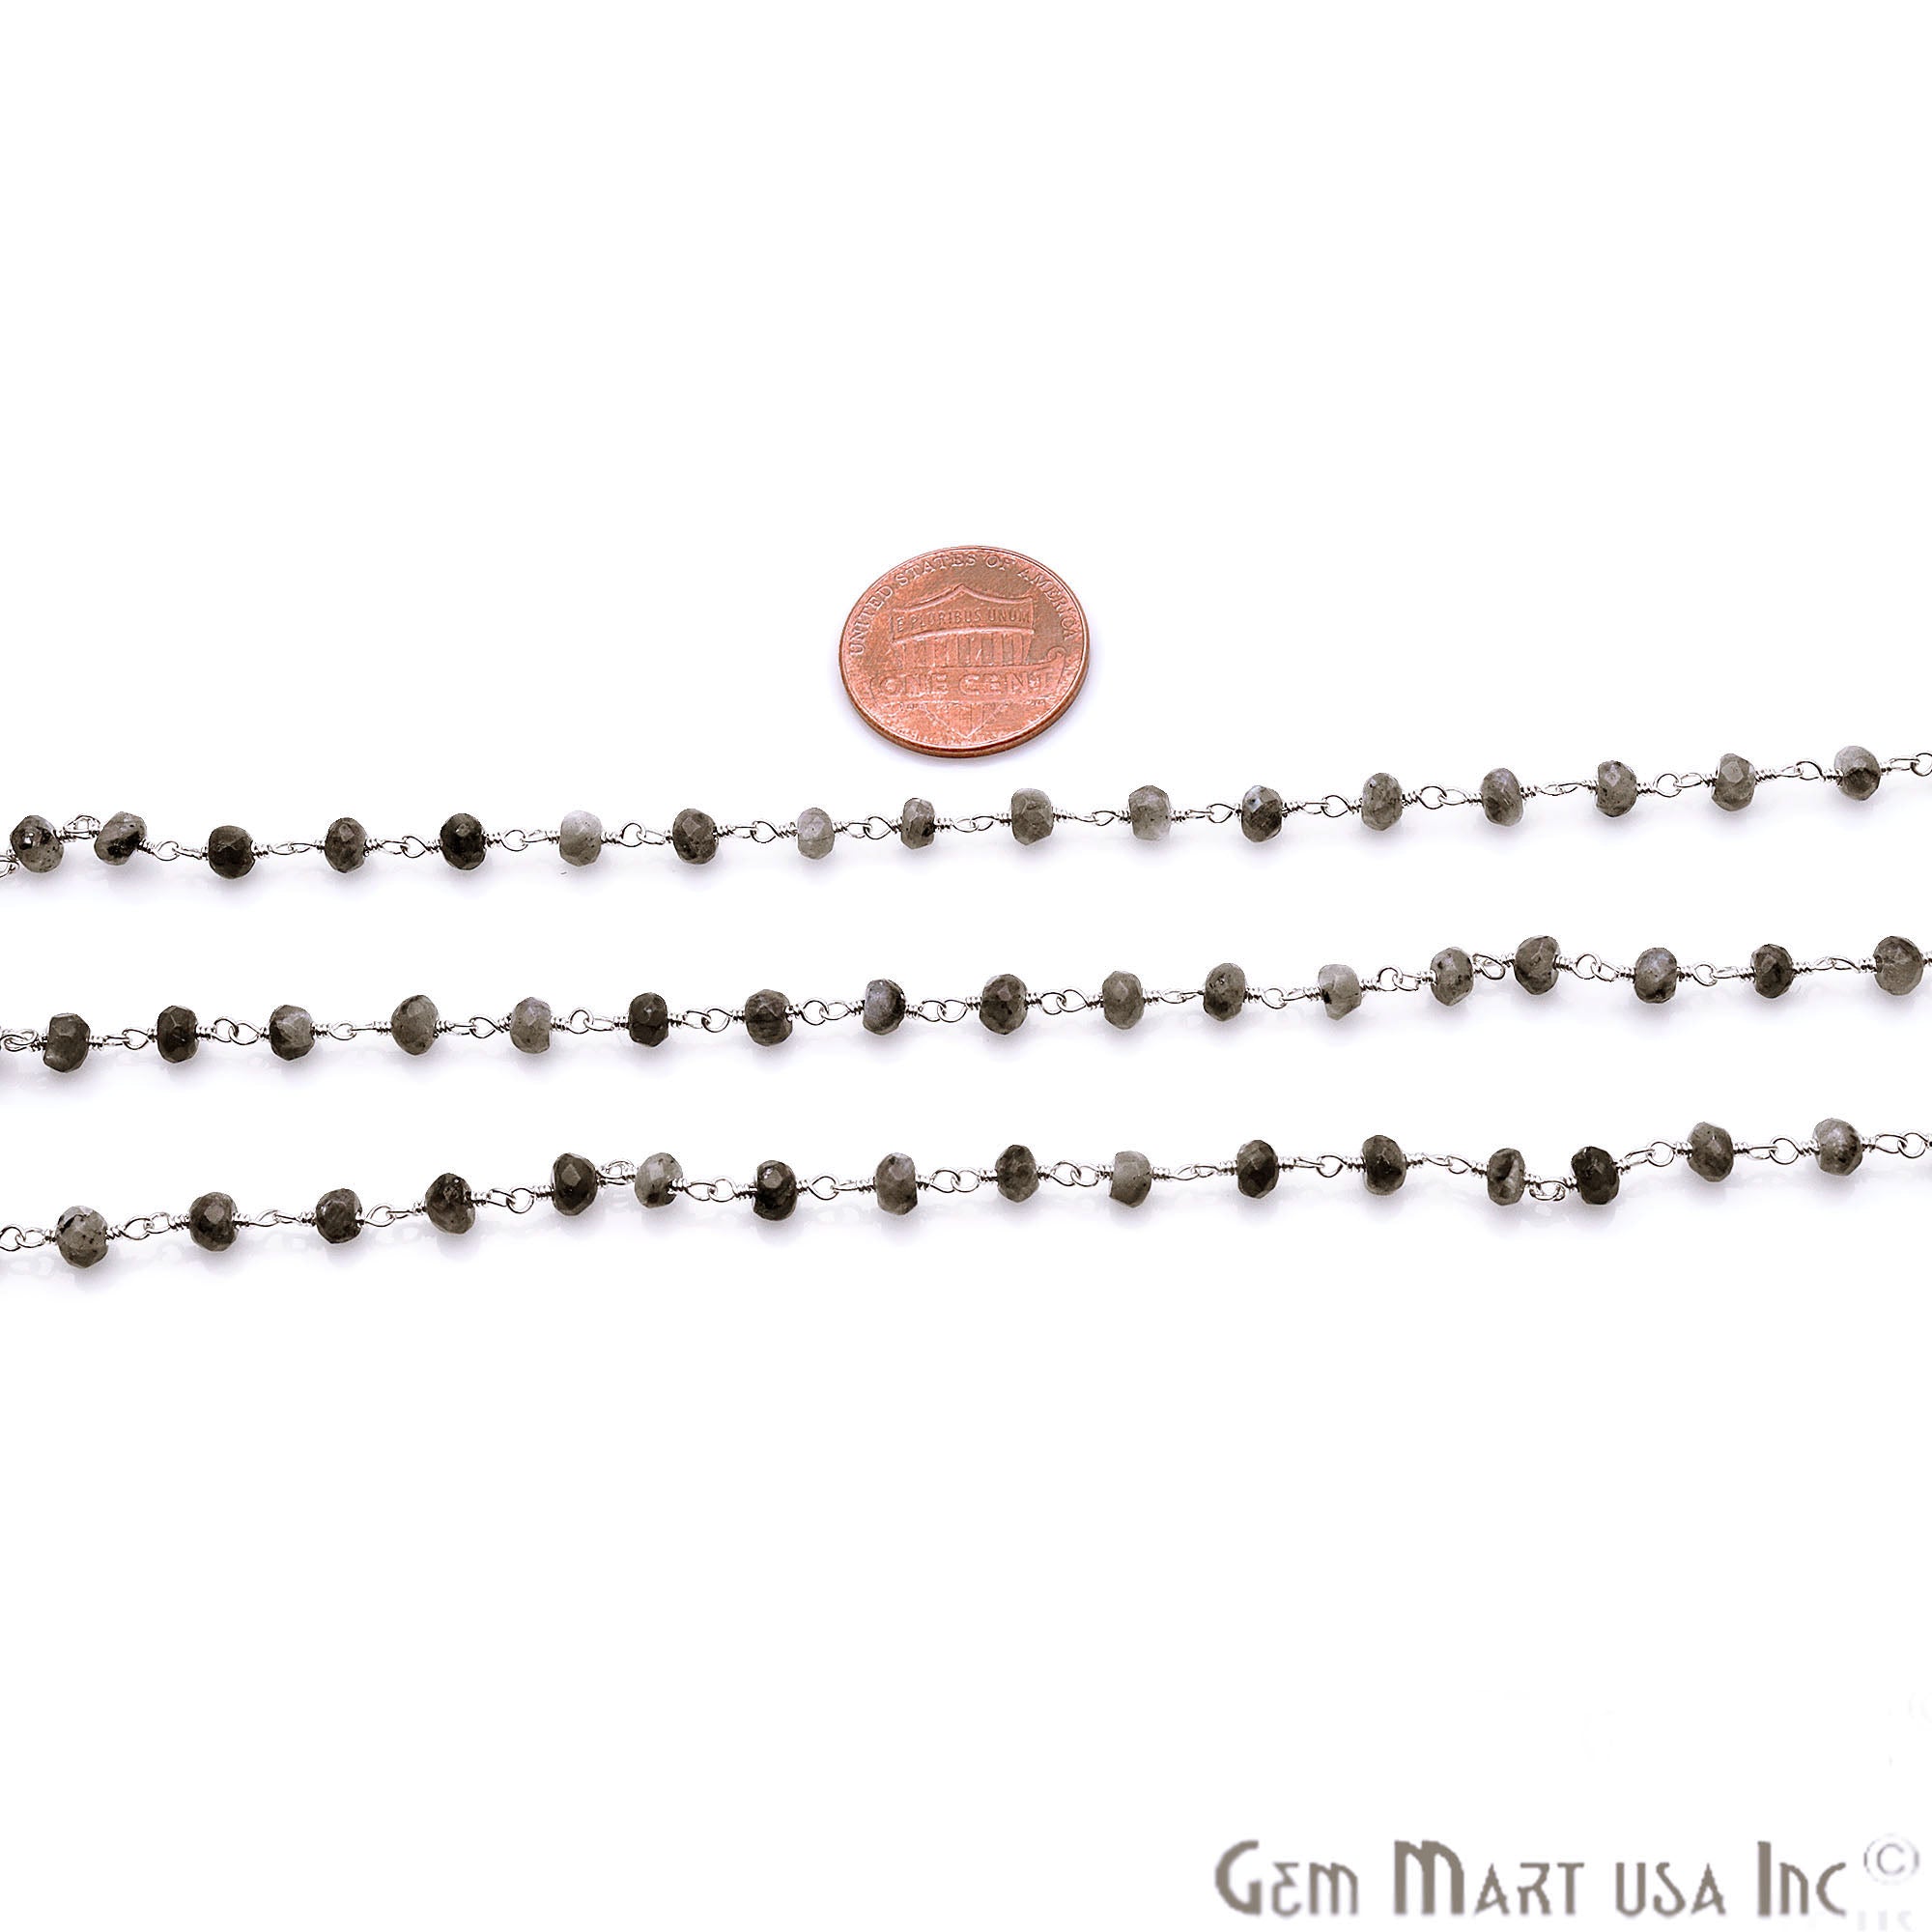 Black Rutilated Jade Faceted Beads Silver Plated Wire Wrapped Rosary Chain - GemMartUSA